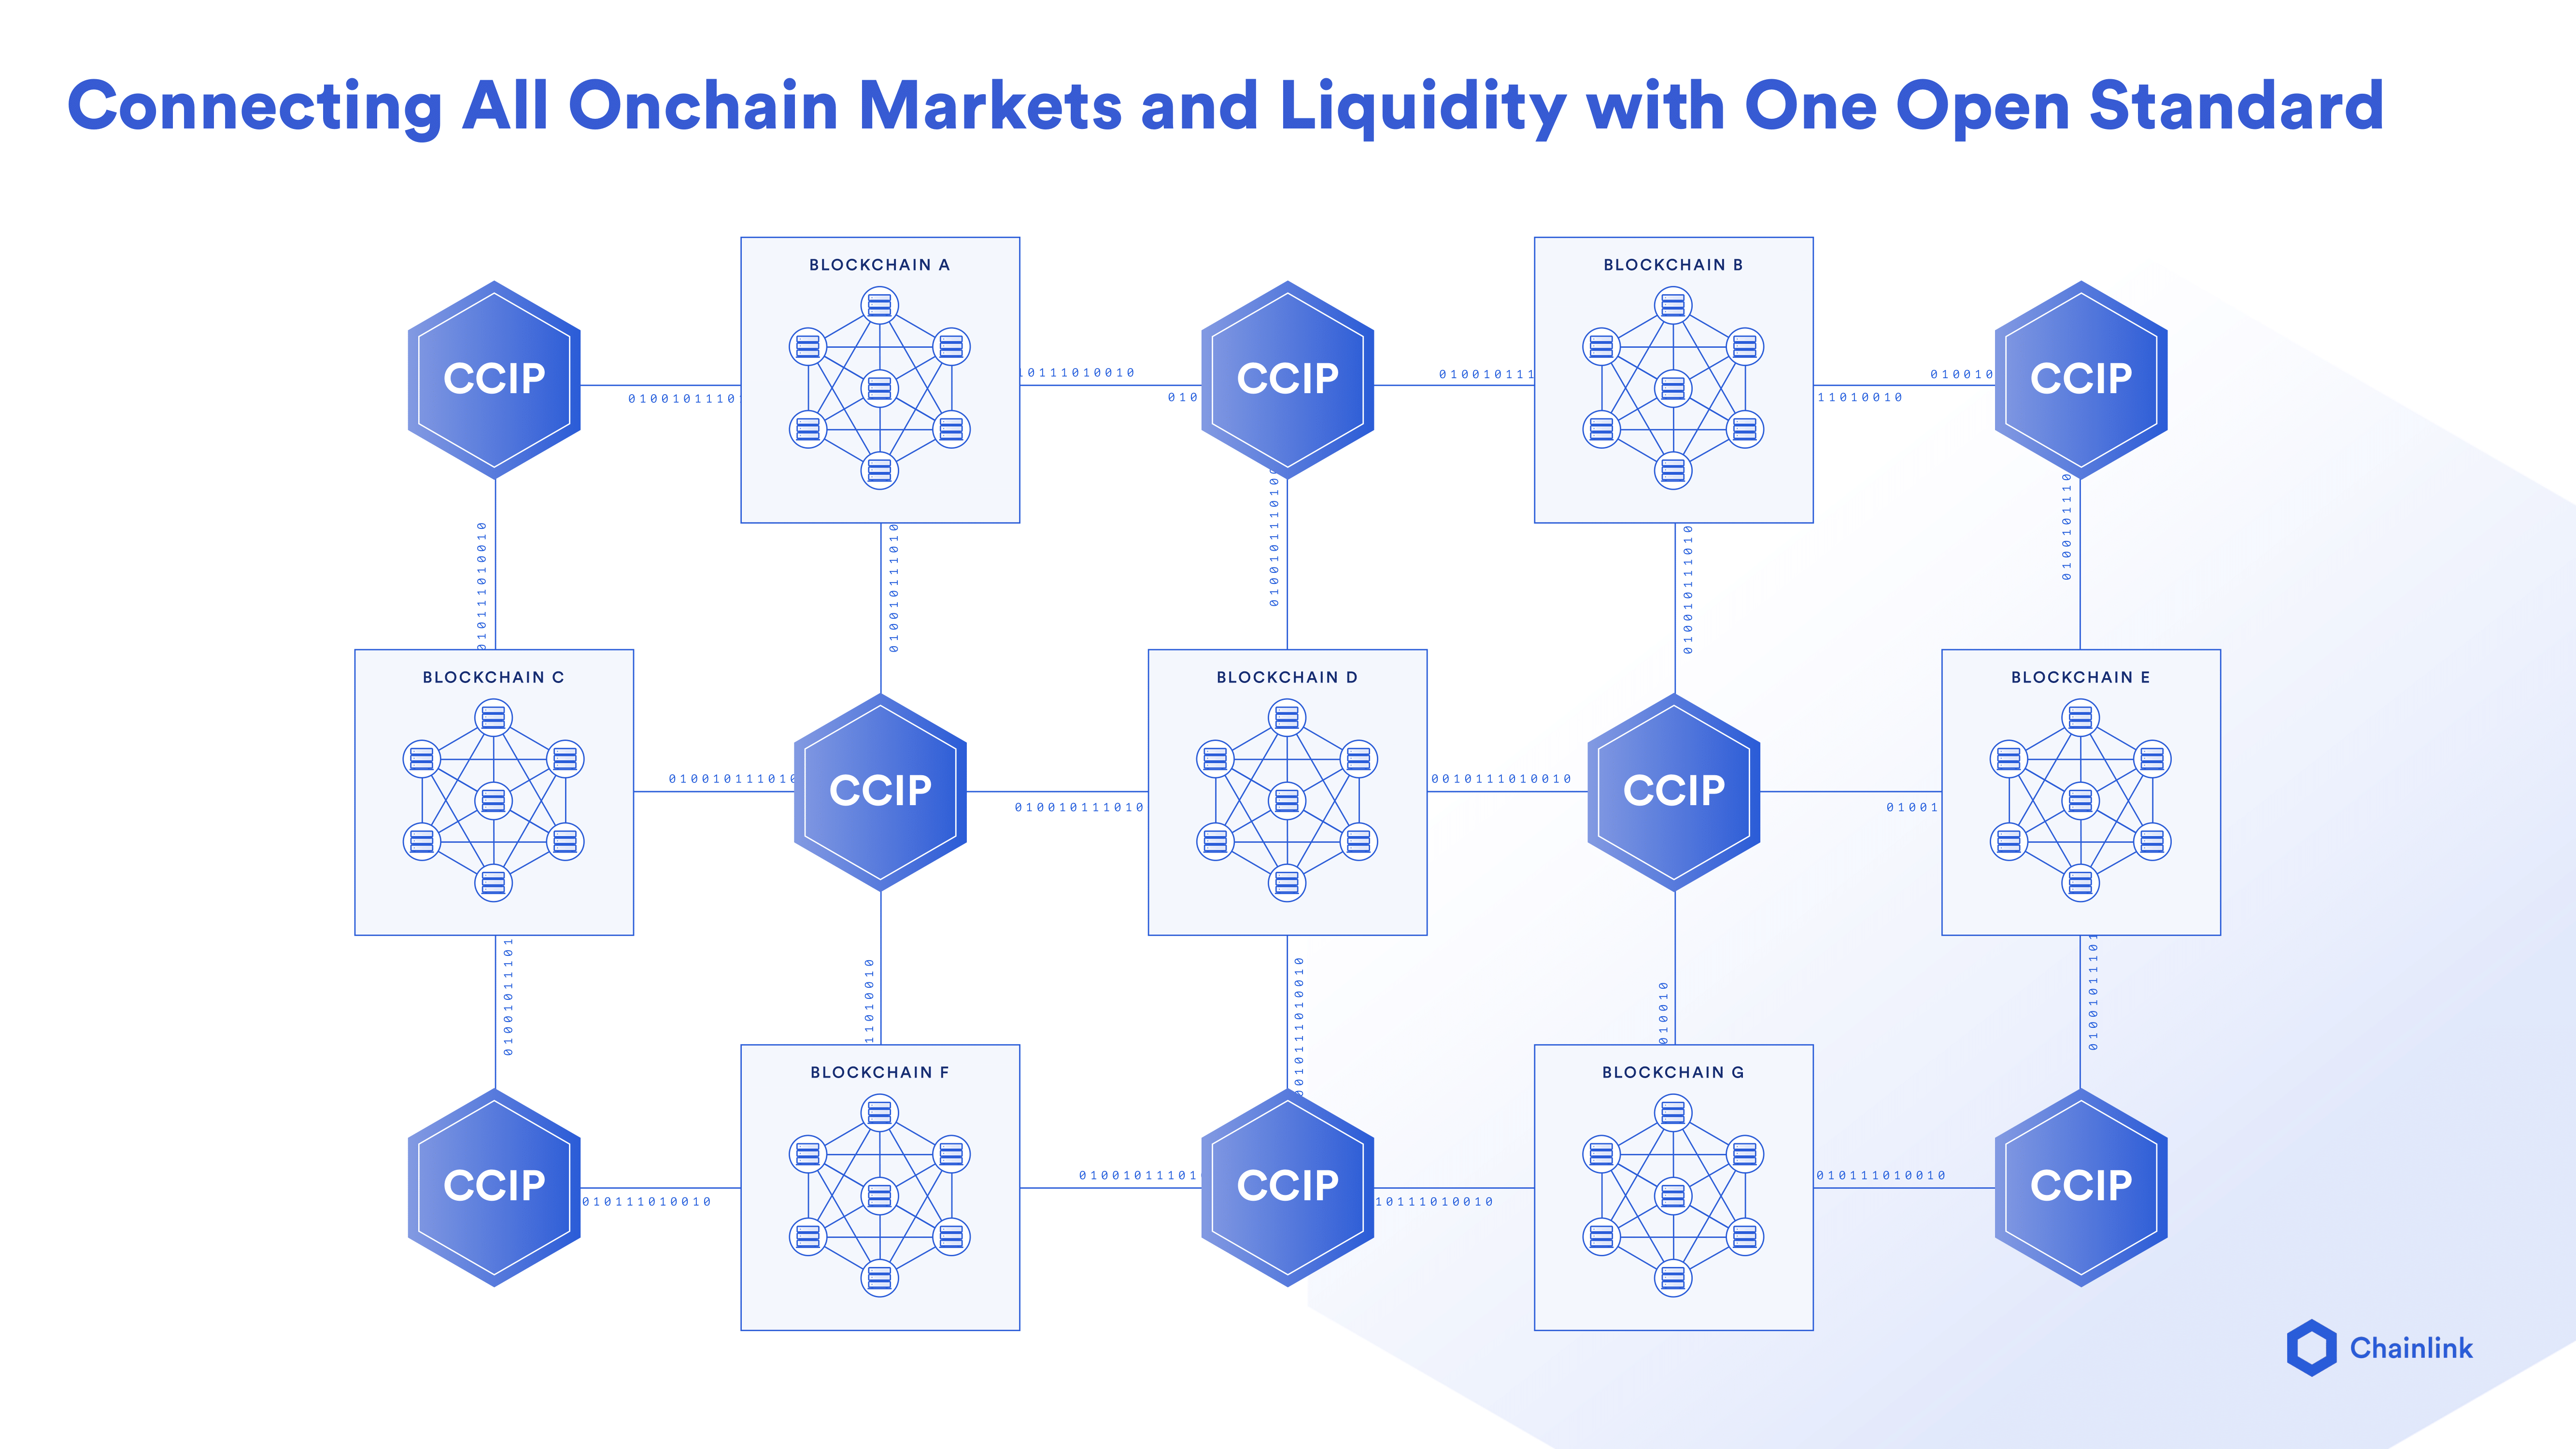 Overview comparing a fragmented tokenized asset landscape with connected onchain markets powered by Chainlink CCIP. 